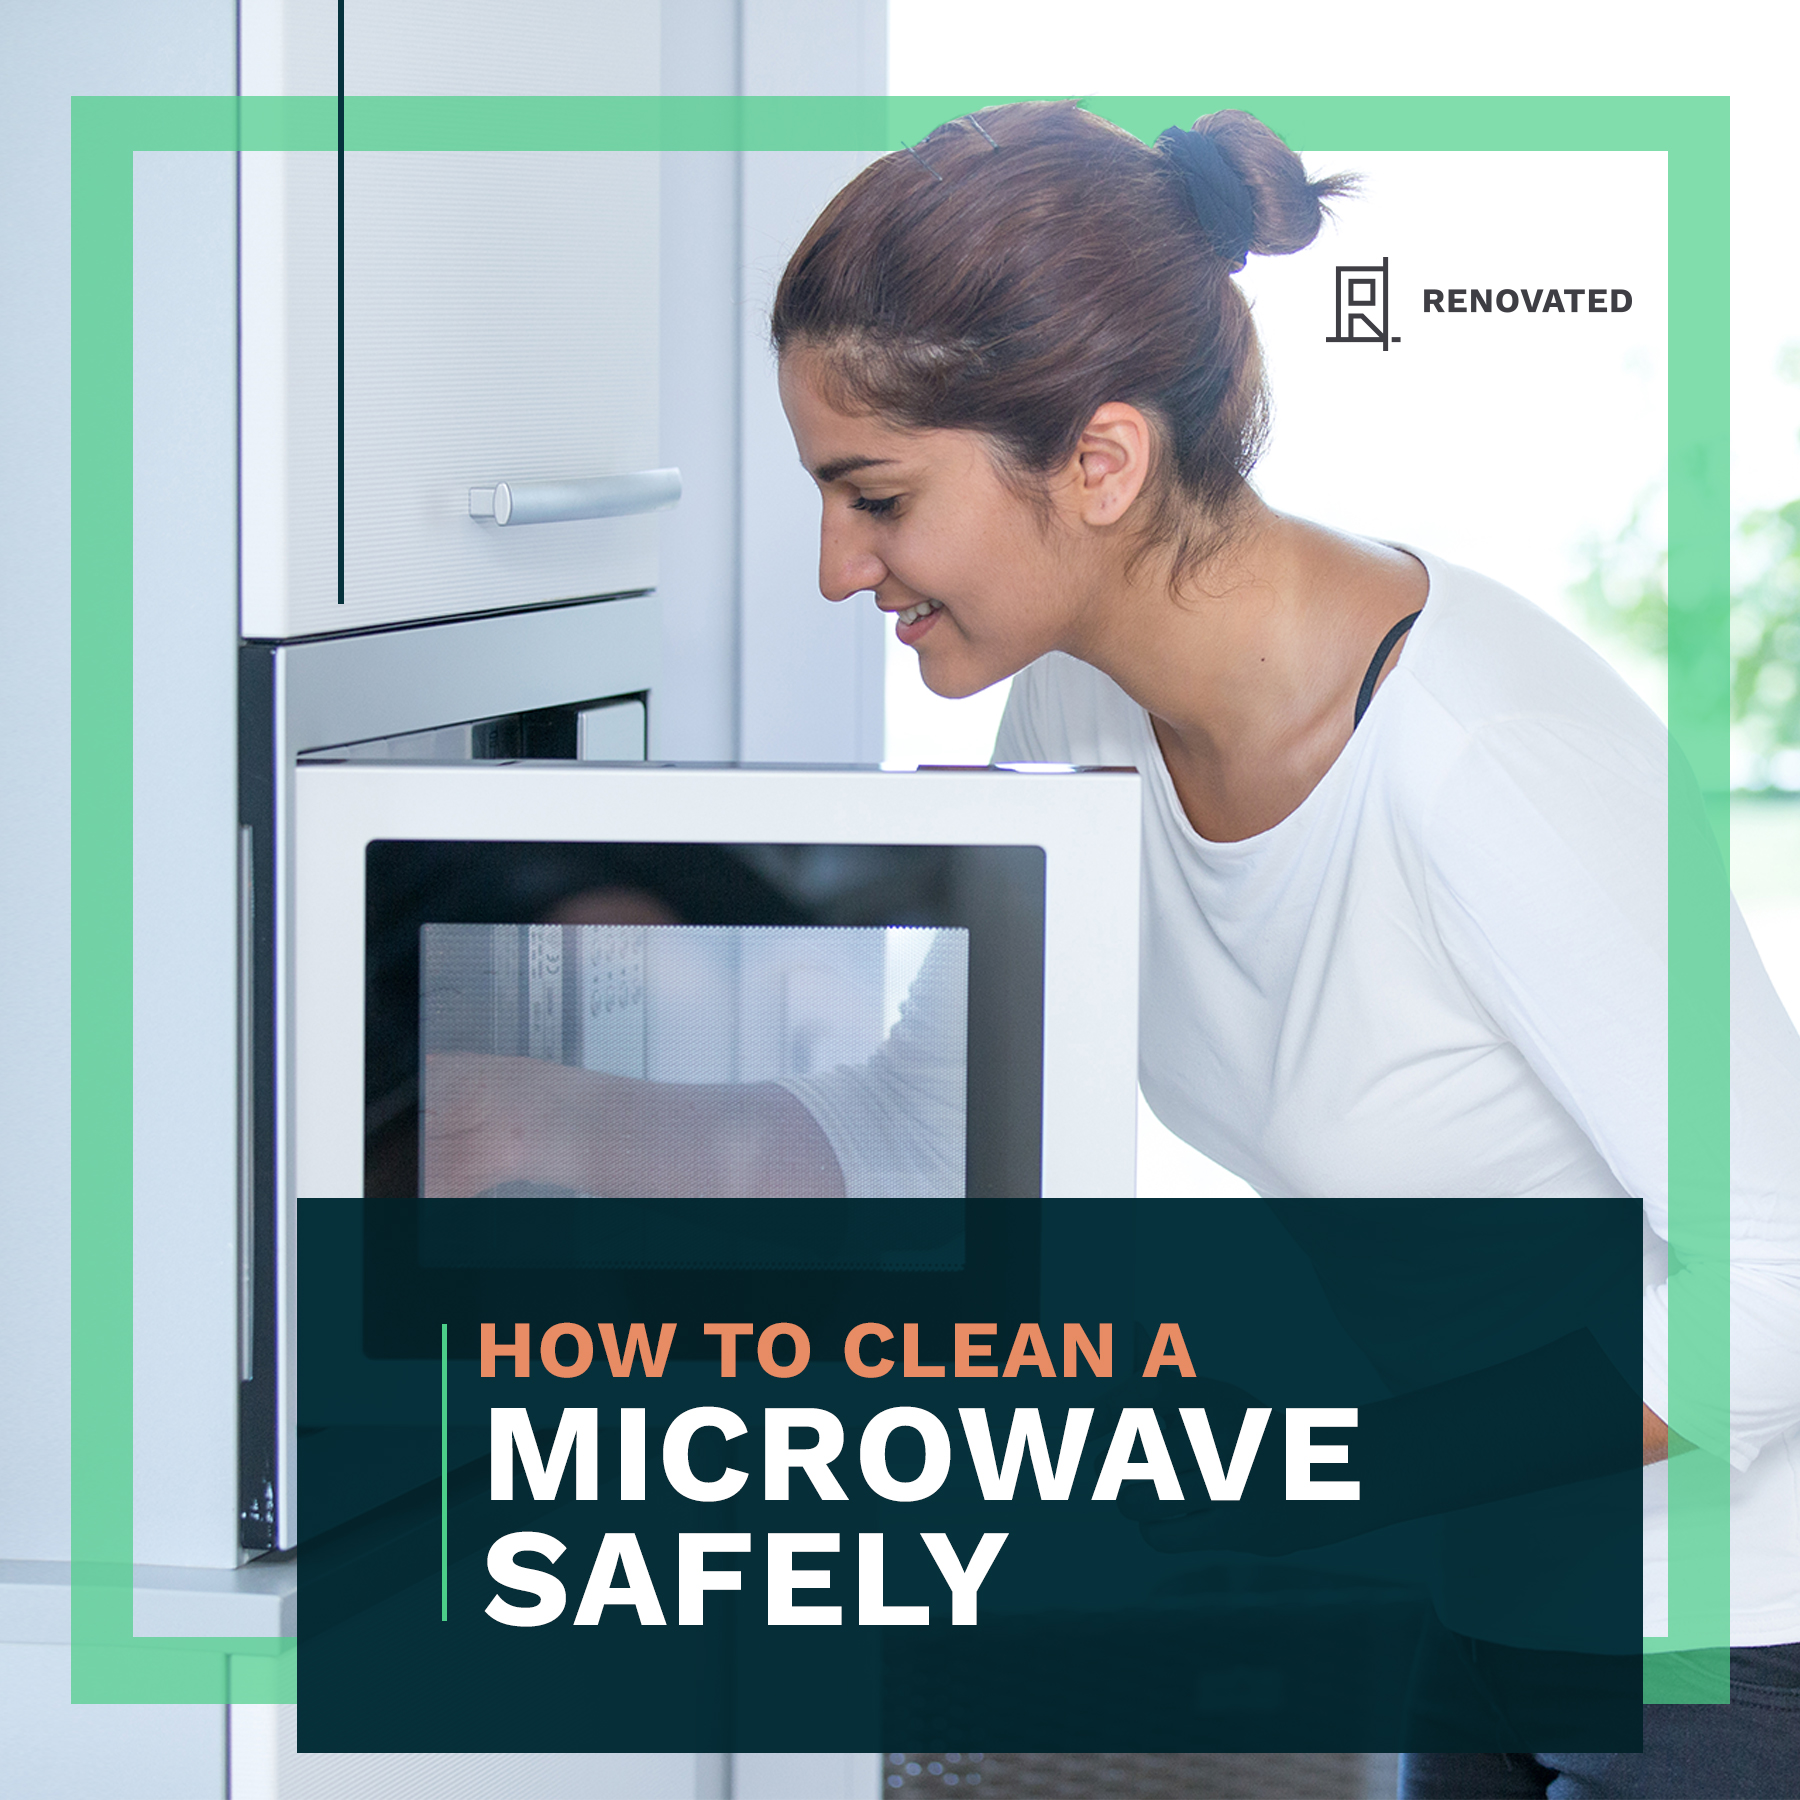 How to Clean a Microwave Safely | Renovated